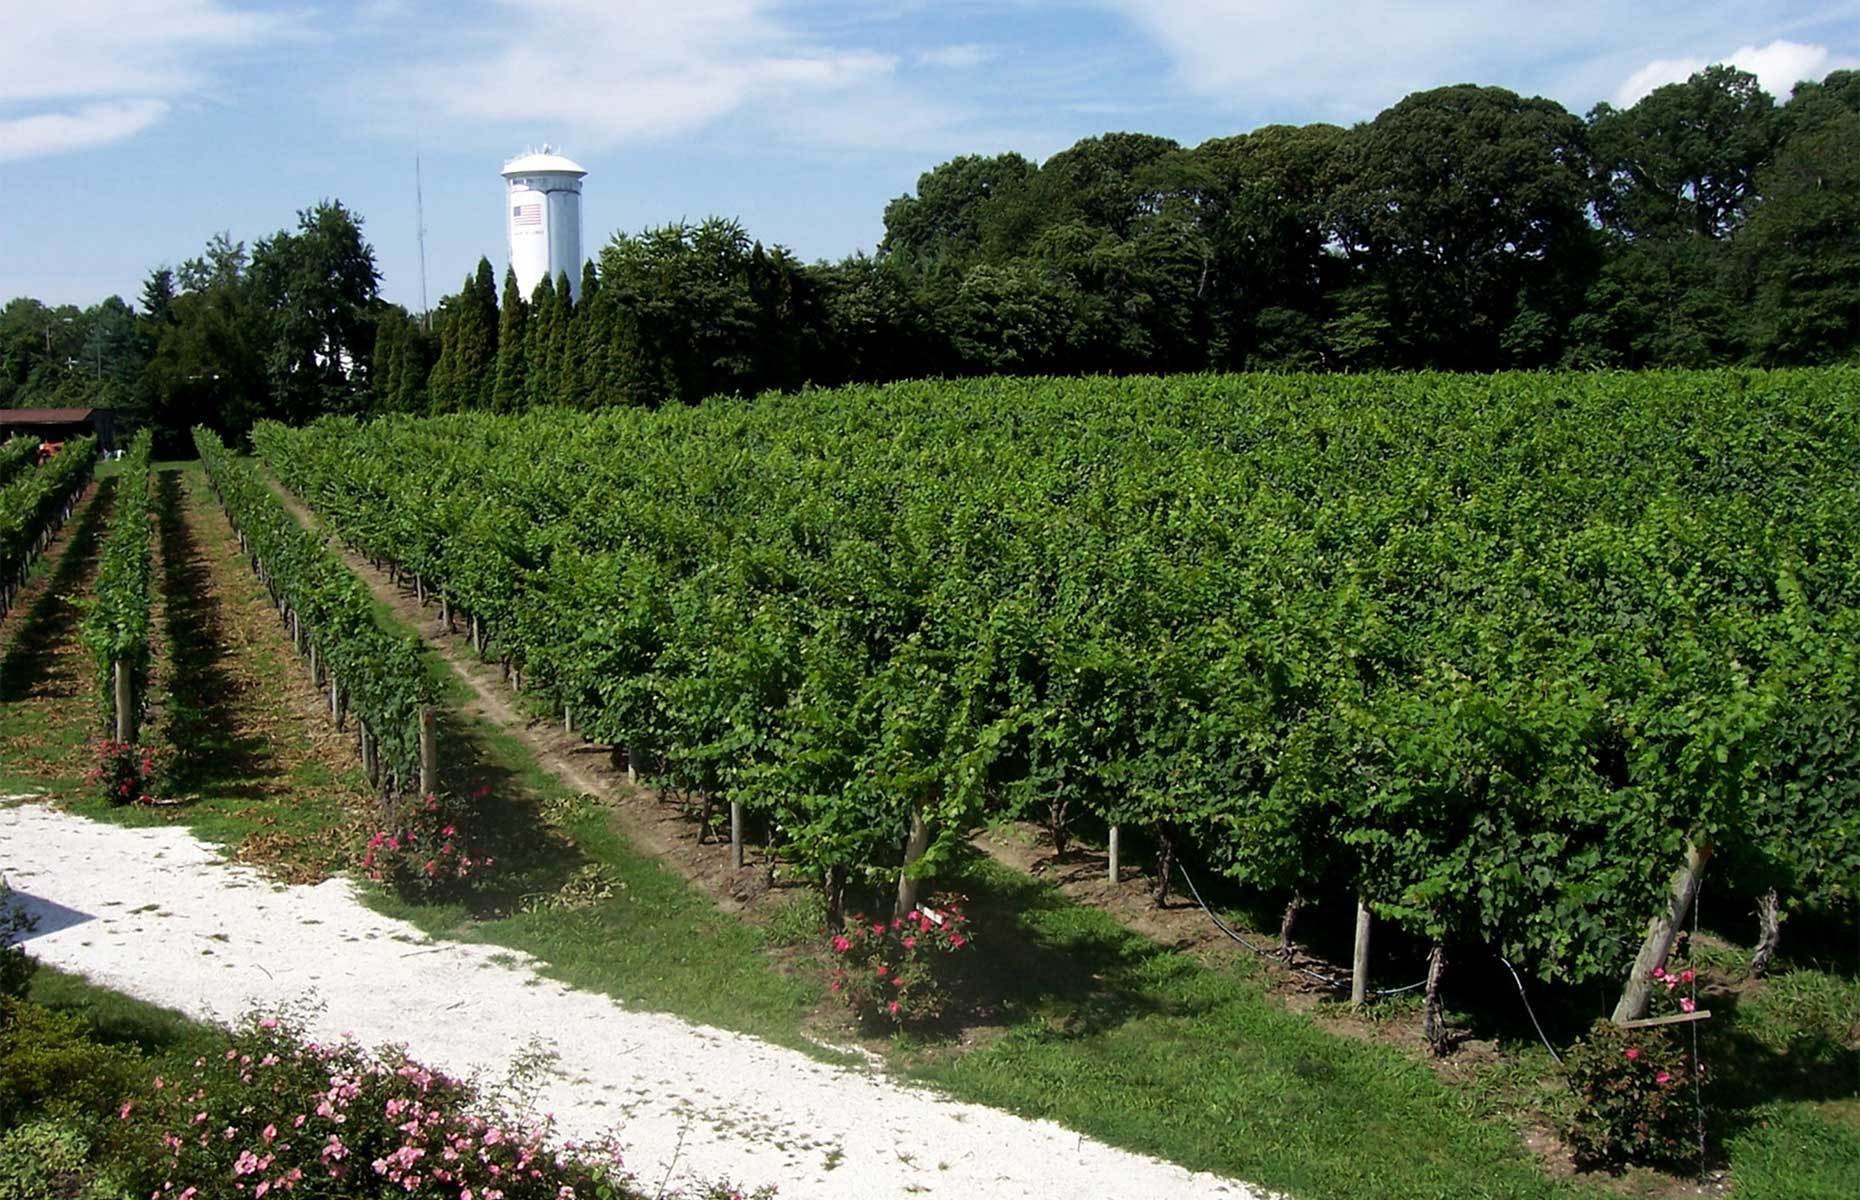 <p class="p1"><span>Why not make the most of your proximity to Cape May by visiting a vineyard? You’ll have nearly 10 wineries to choose from, including the <a href="https://capemaywinery.com/" rel="noreferrer noopener"><span>Cape May Winery</span></a>, <a href="https://willowcreekwinerycapemay.com/" rel="noreferrer noopener"><span>Willow Creek Farm and Winery</span></a>, <a href="https://www.turdovineyards.com/" rel="noreferrer noopener"><span>Turdo Vineyards and Winery</span></a>, <a href="https://natalivineyards.com/" rel="noreferrer noopener"><span>Natali Vineyards</span></a>, and <a href="http://www.jessiecreekwinery.com/" rel="noreferrer noopener"><span>Jessie Creek Winery</span></a></span><span>, Vineyard, and Inn</span><span>.</span></p>